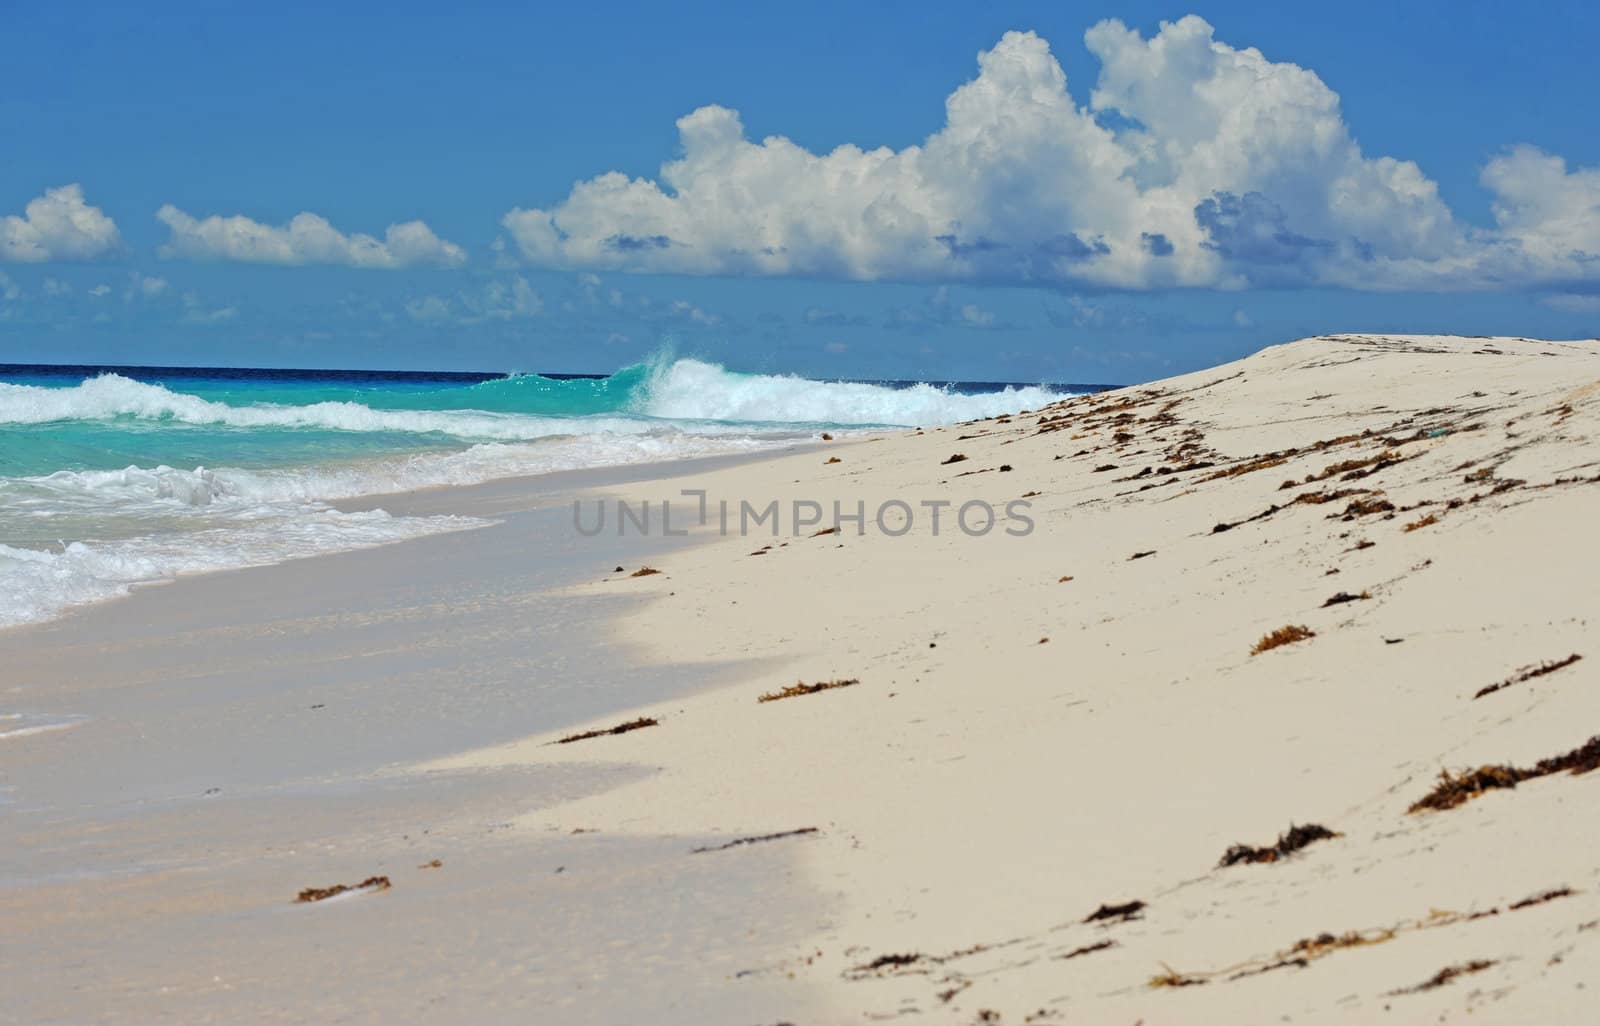 Beautiful scenic beach in tropical destination by ftlaudgirl